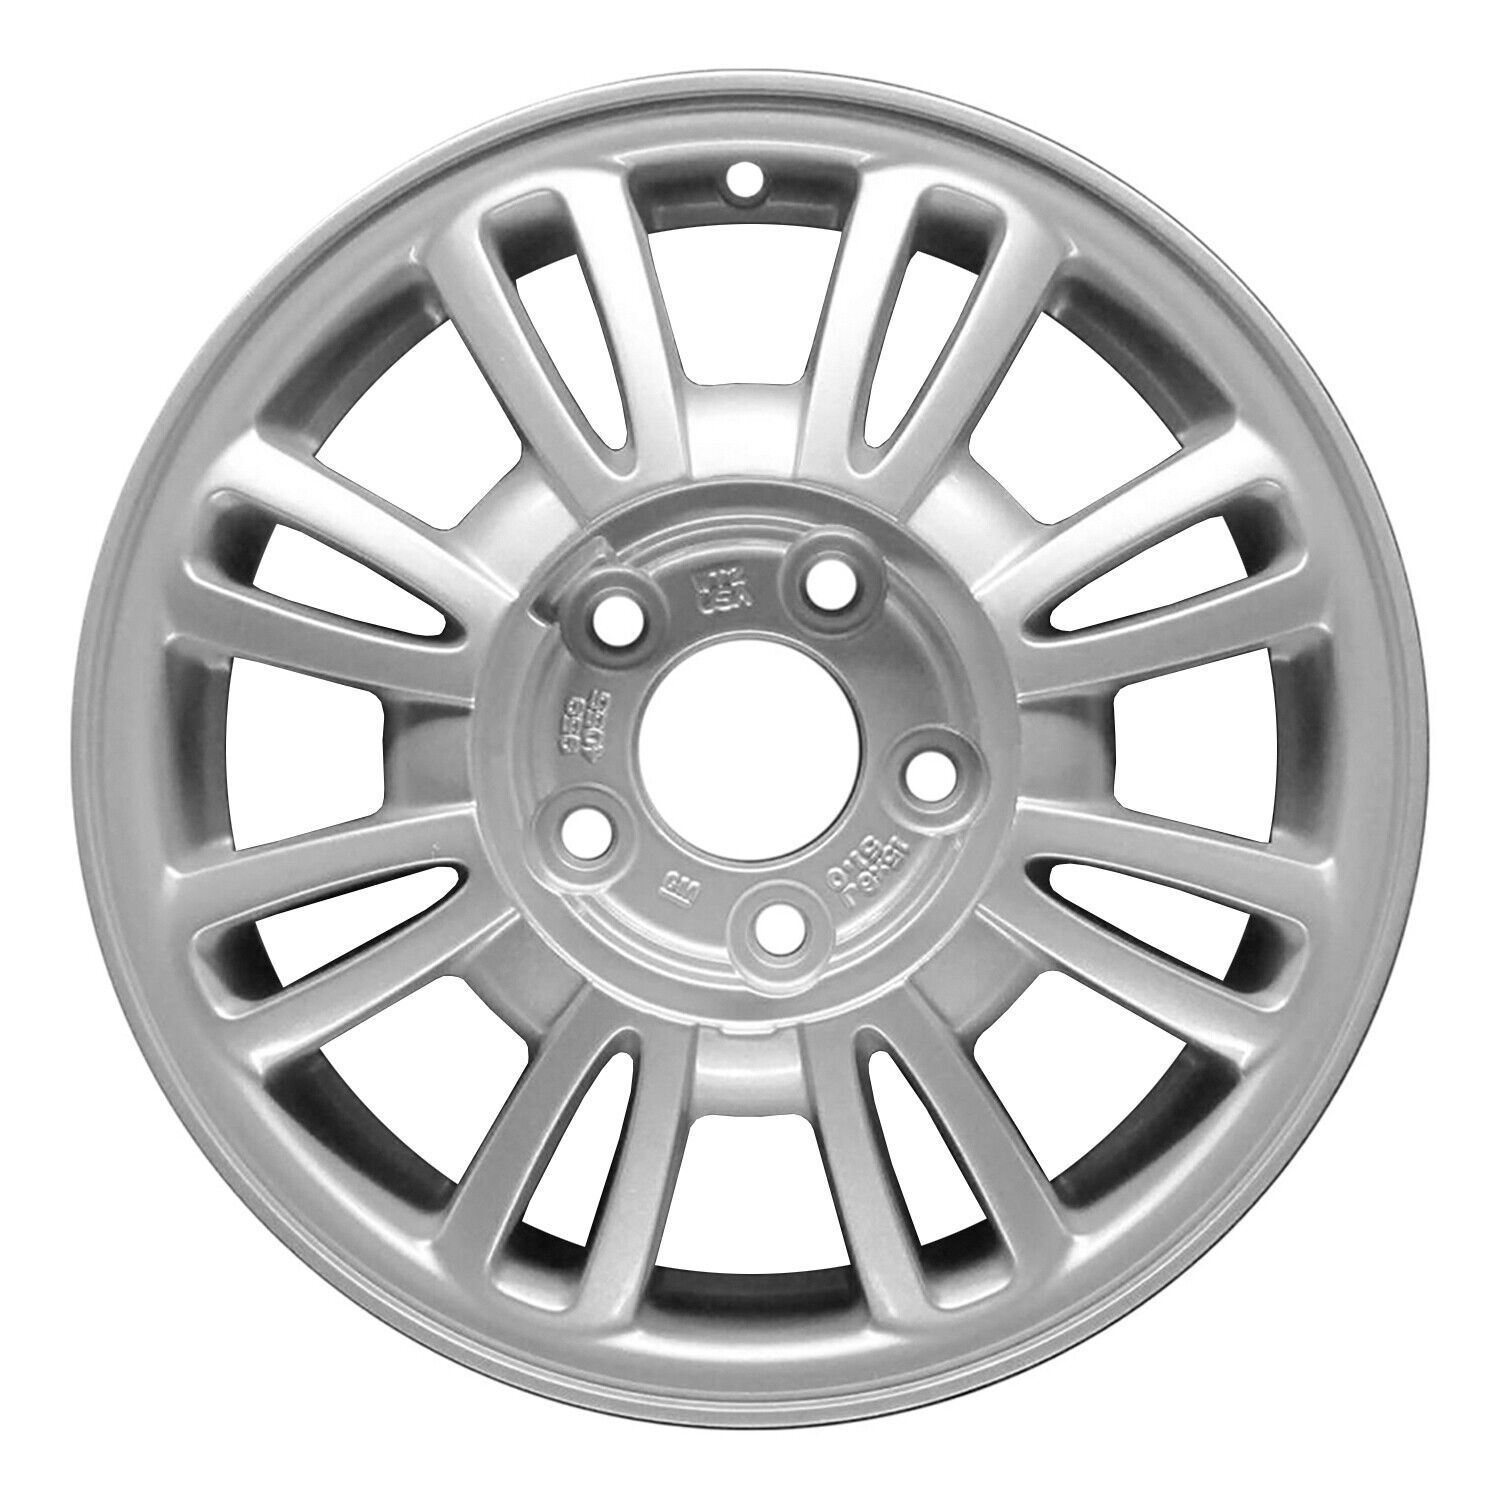 Reconditioned 15x6 Painted Silver Wheel fits 560-04043